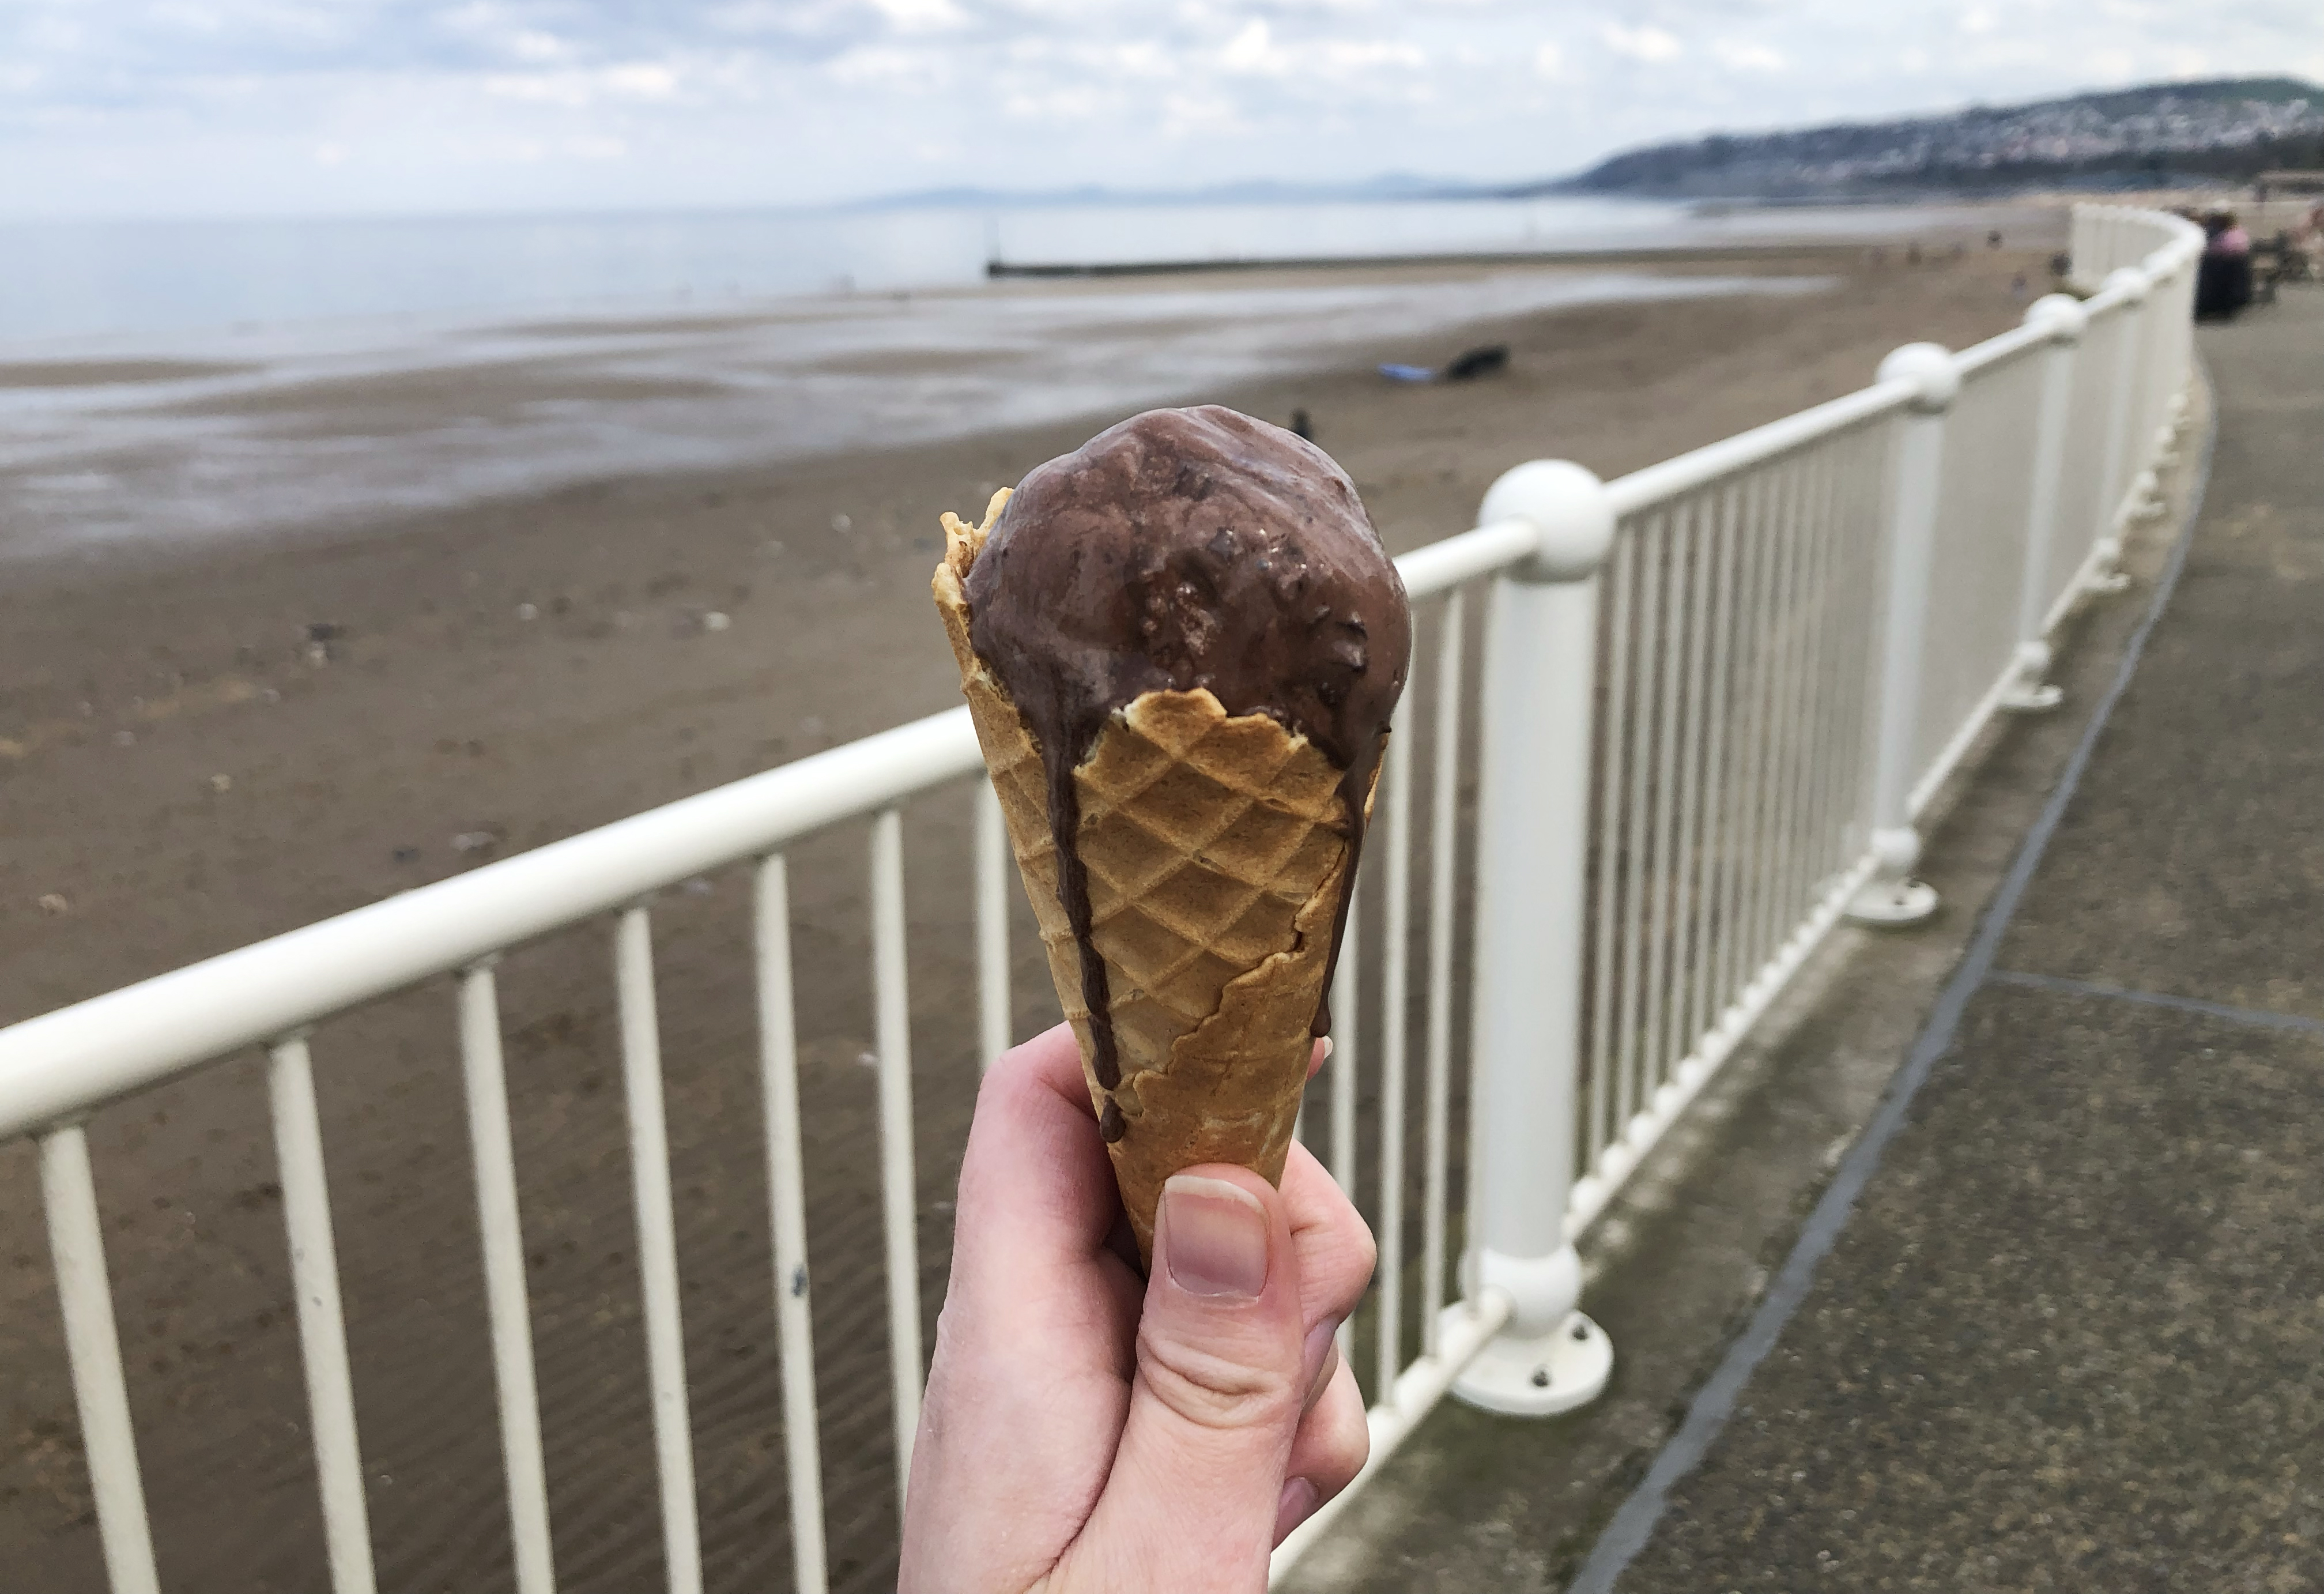 Holding my melting Chocolate Ice Cream in front of the beach